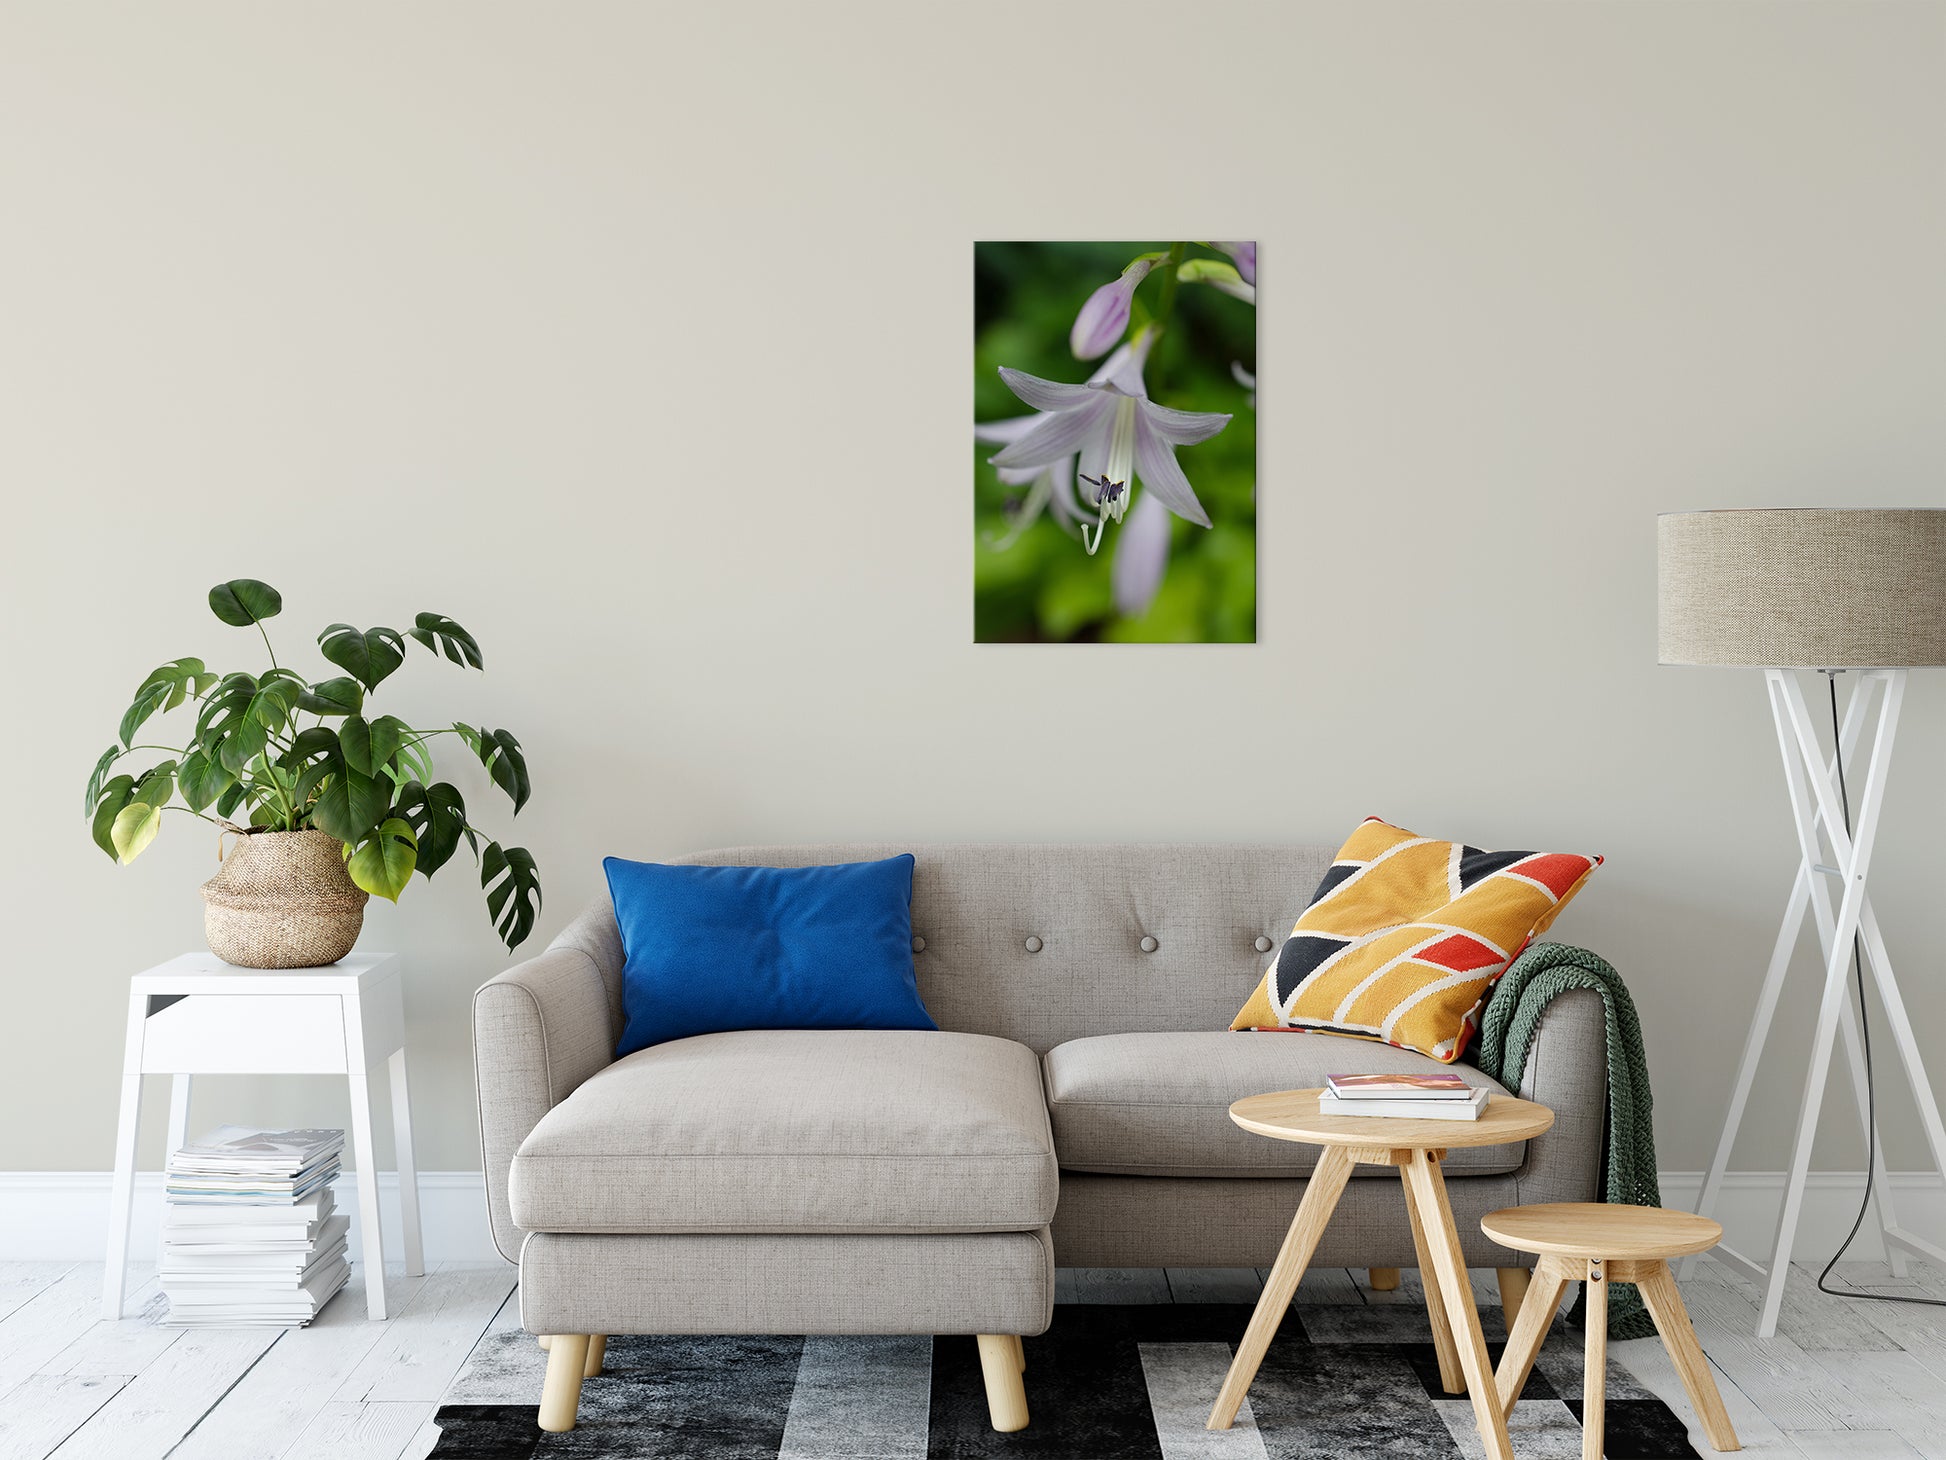 Hosta Bloom Nature / Floral Photo Fine Art Canvas Wall Art Prints 20" x 30" - PIPAFINEART